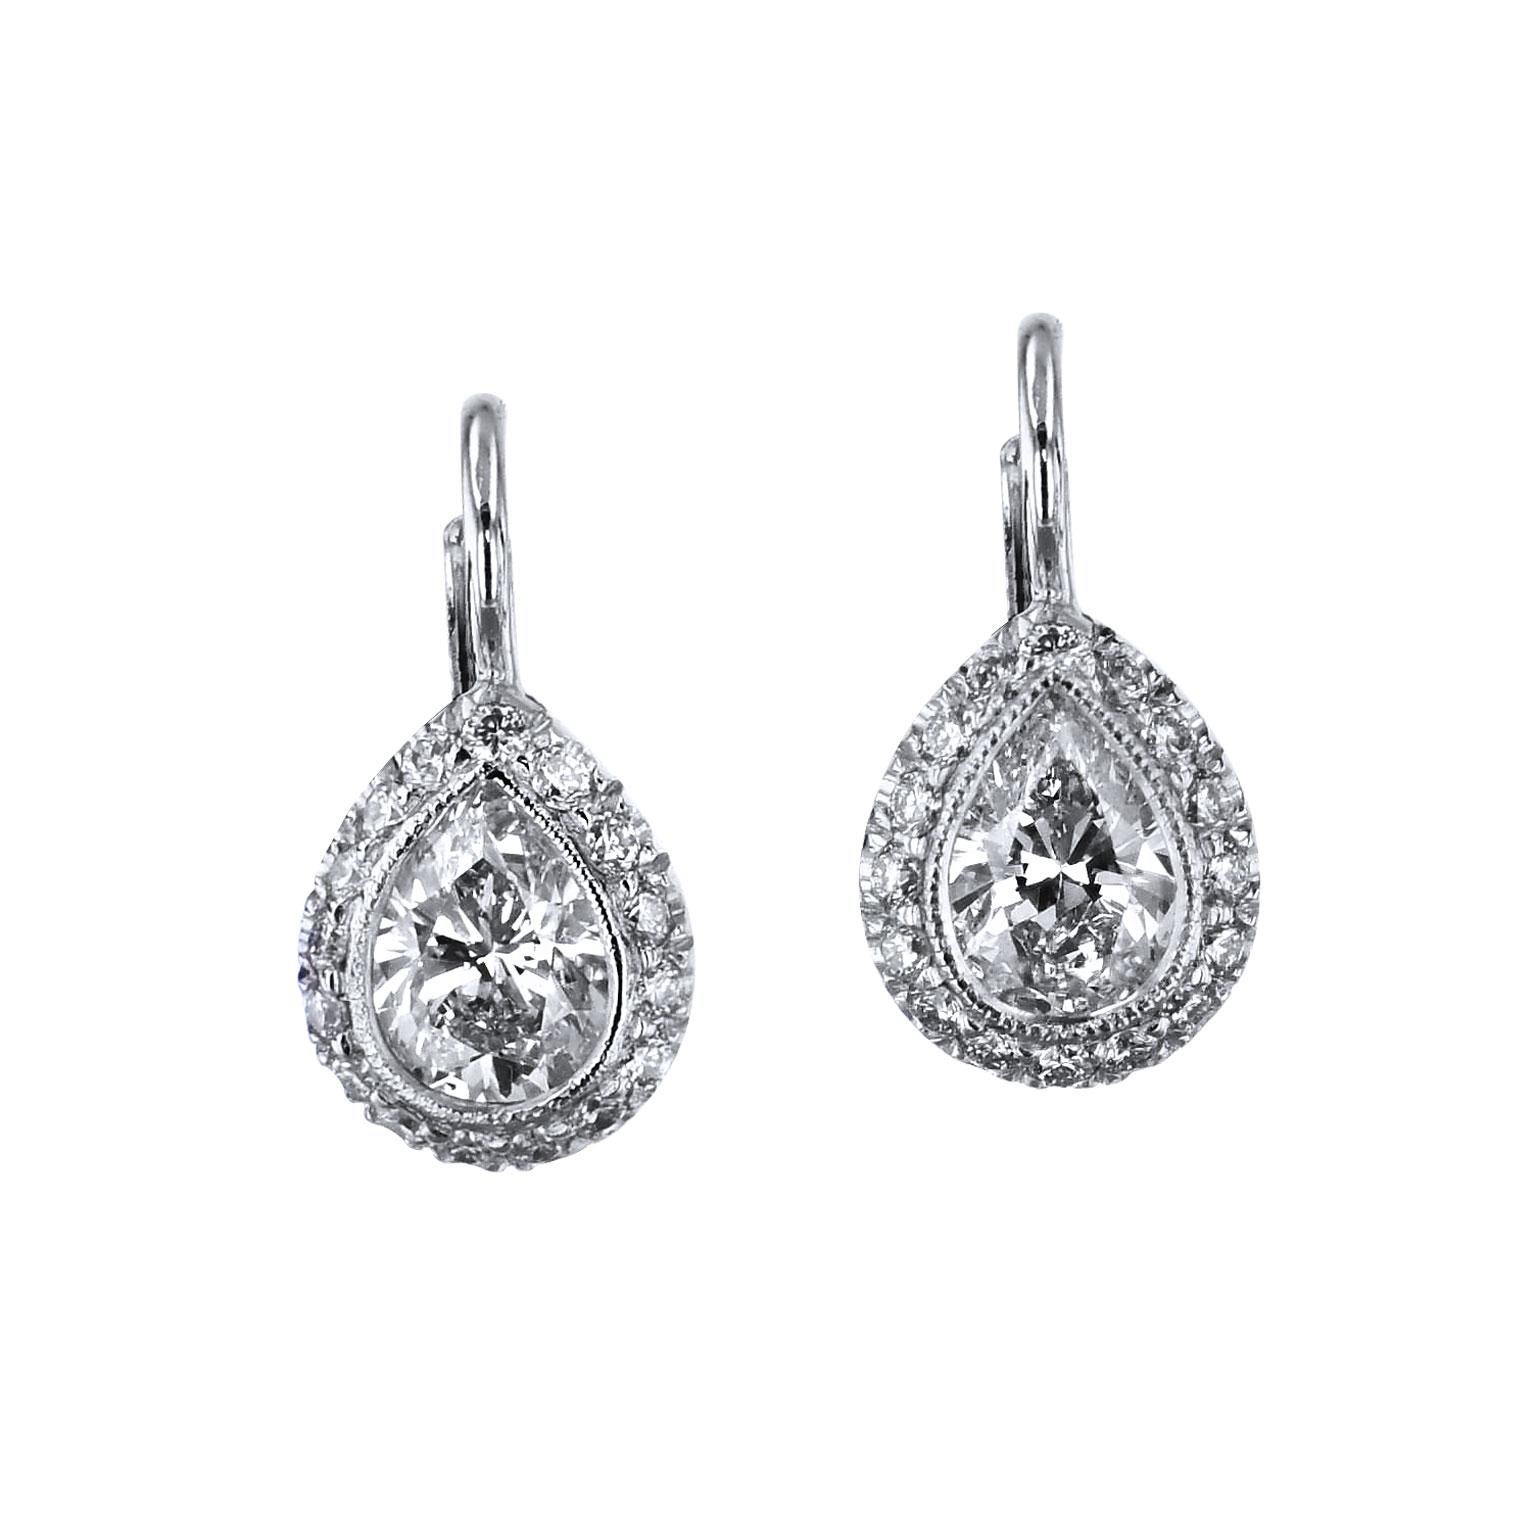 1.06 Carat Pear Shaped and Pave Set Diamonds in 18 kt Gold Lever-Back Earrings

The fabulous earrings are one of a kind and handmade by H&H Jewels.  

They feature two pear-shaped diamonds, with a total weight of 0.85 carat (I/J/SI1), with an